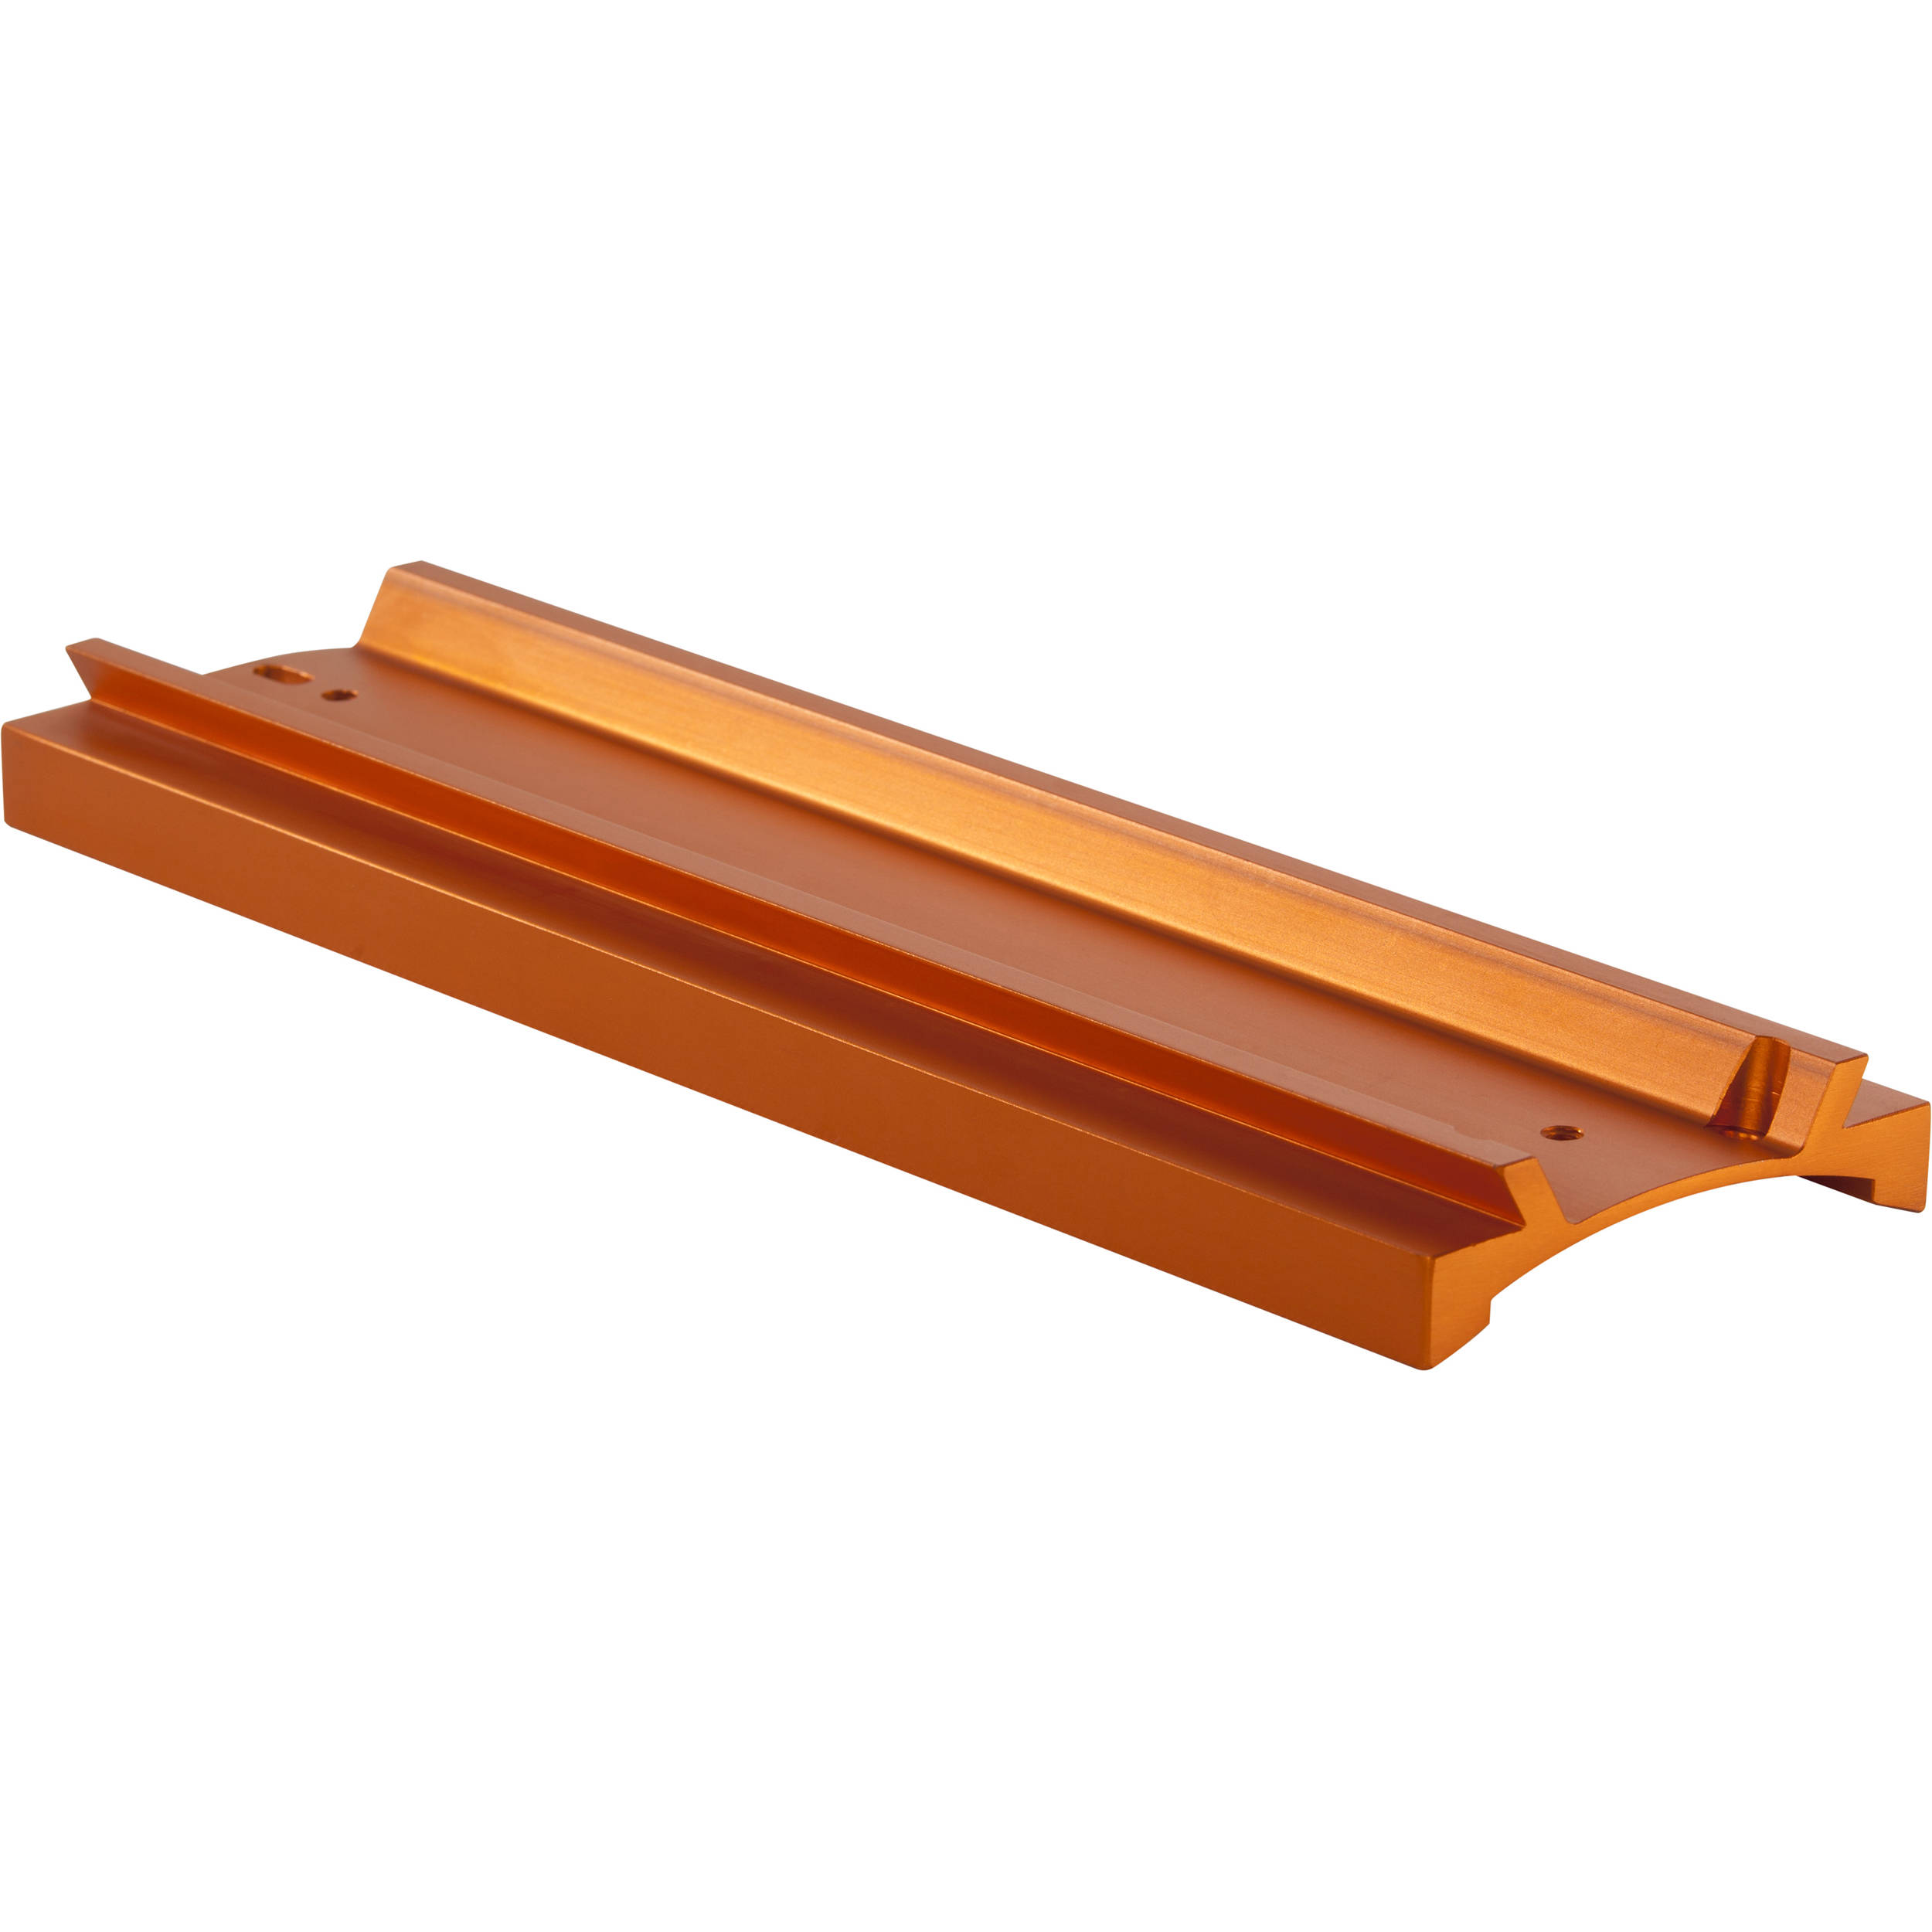 Celestron 8-inch Dovetail bar (CGE 